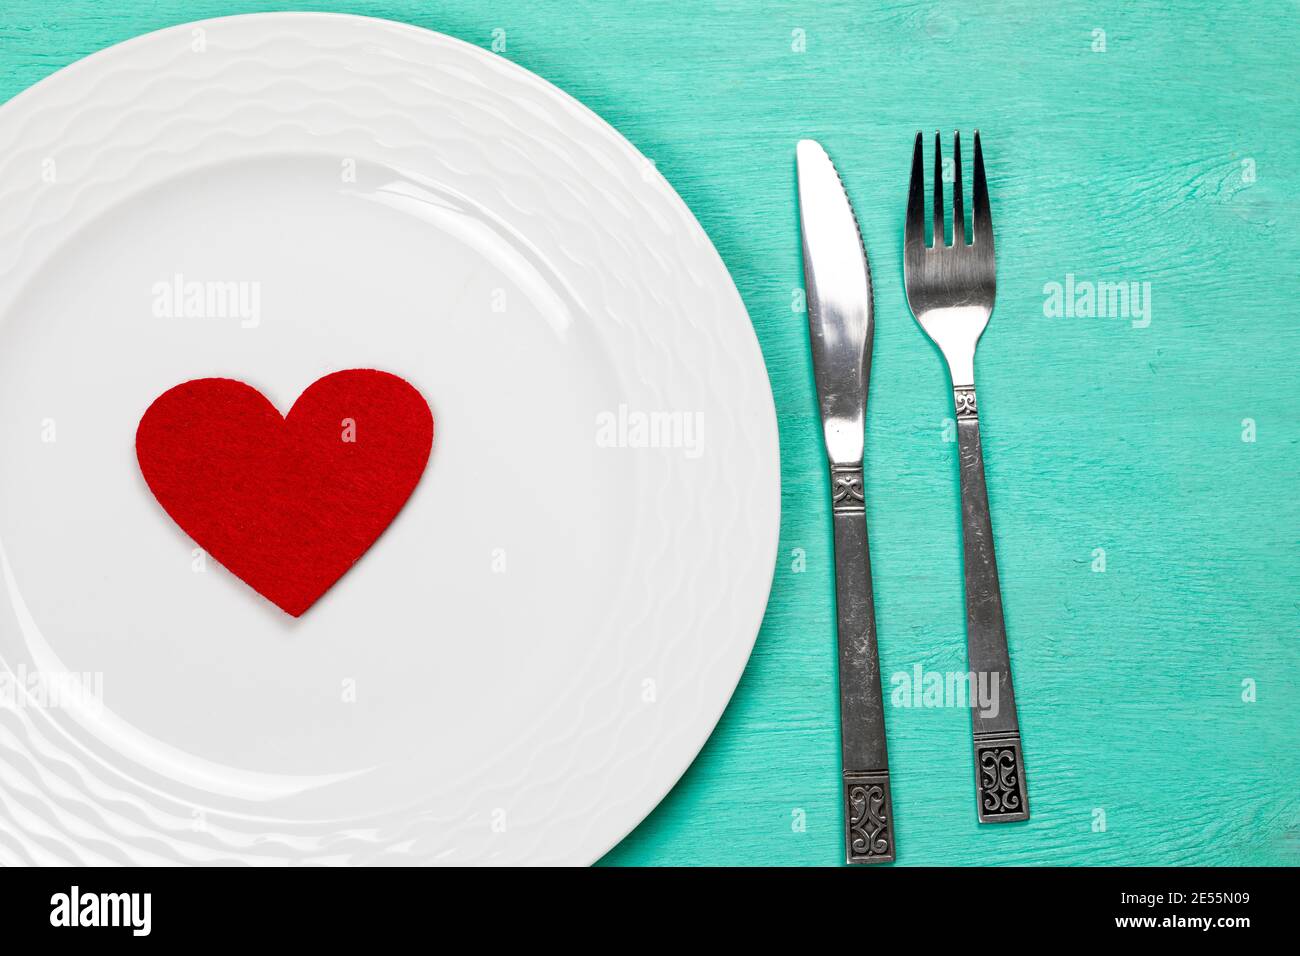 Valentine's day and dinner concept Stock Photo